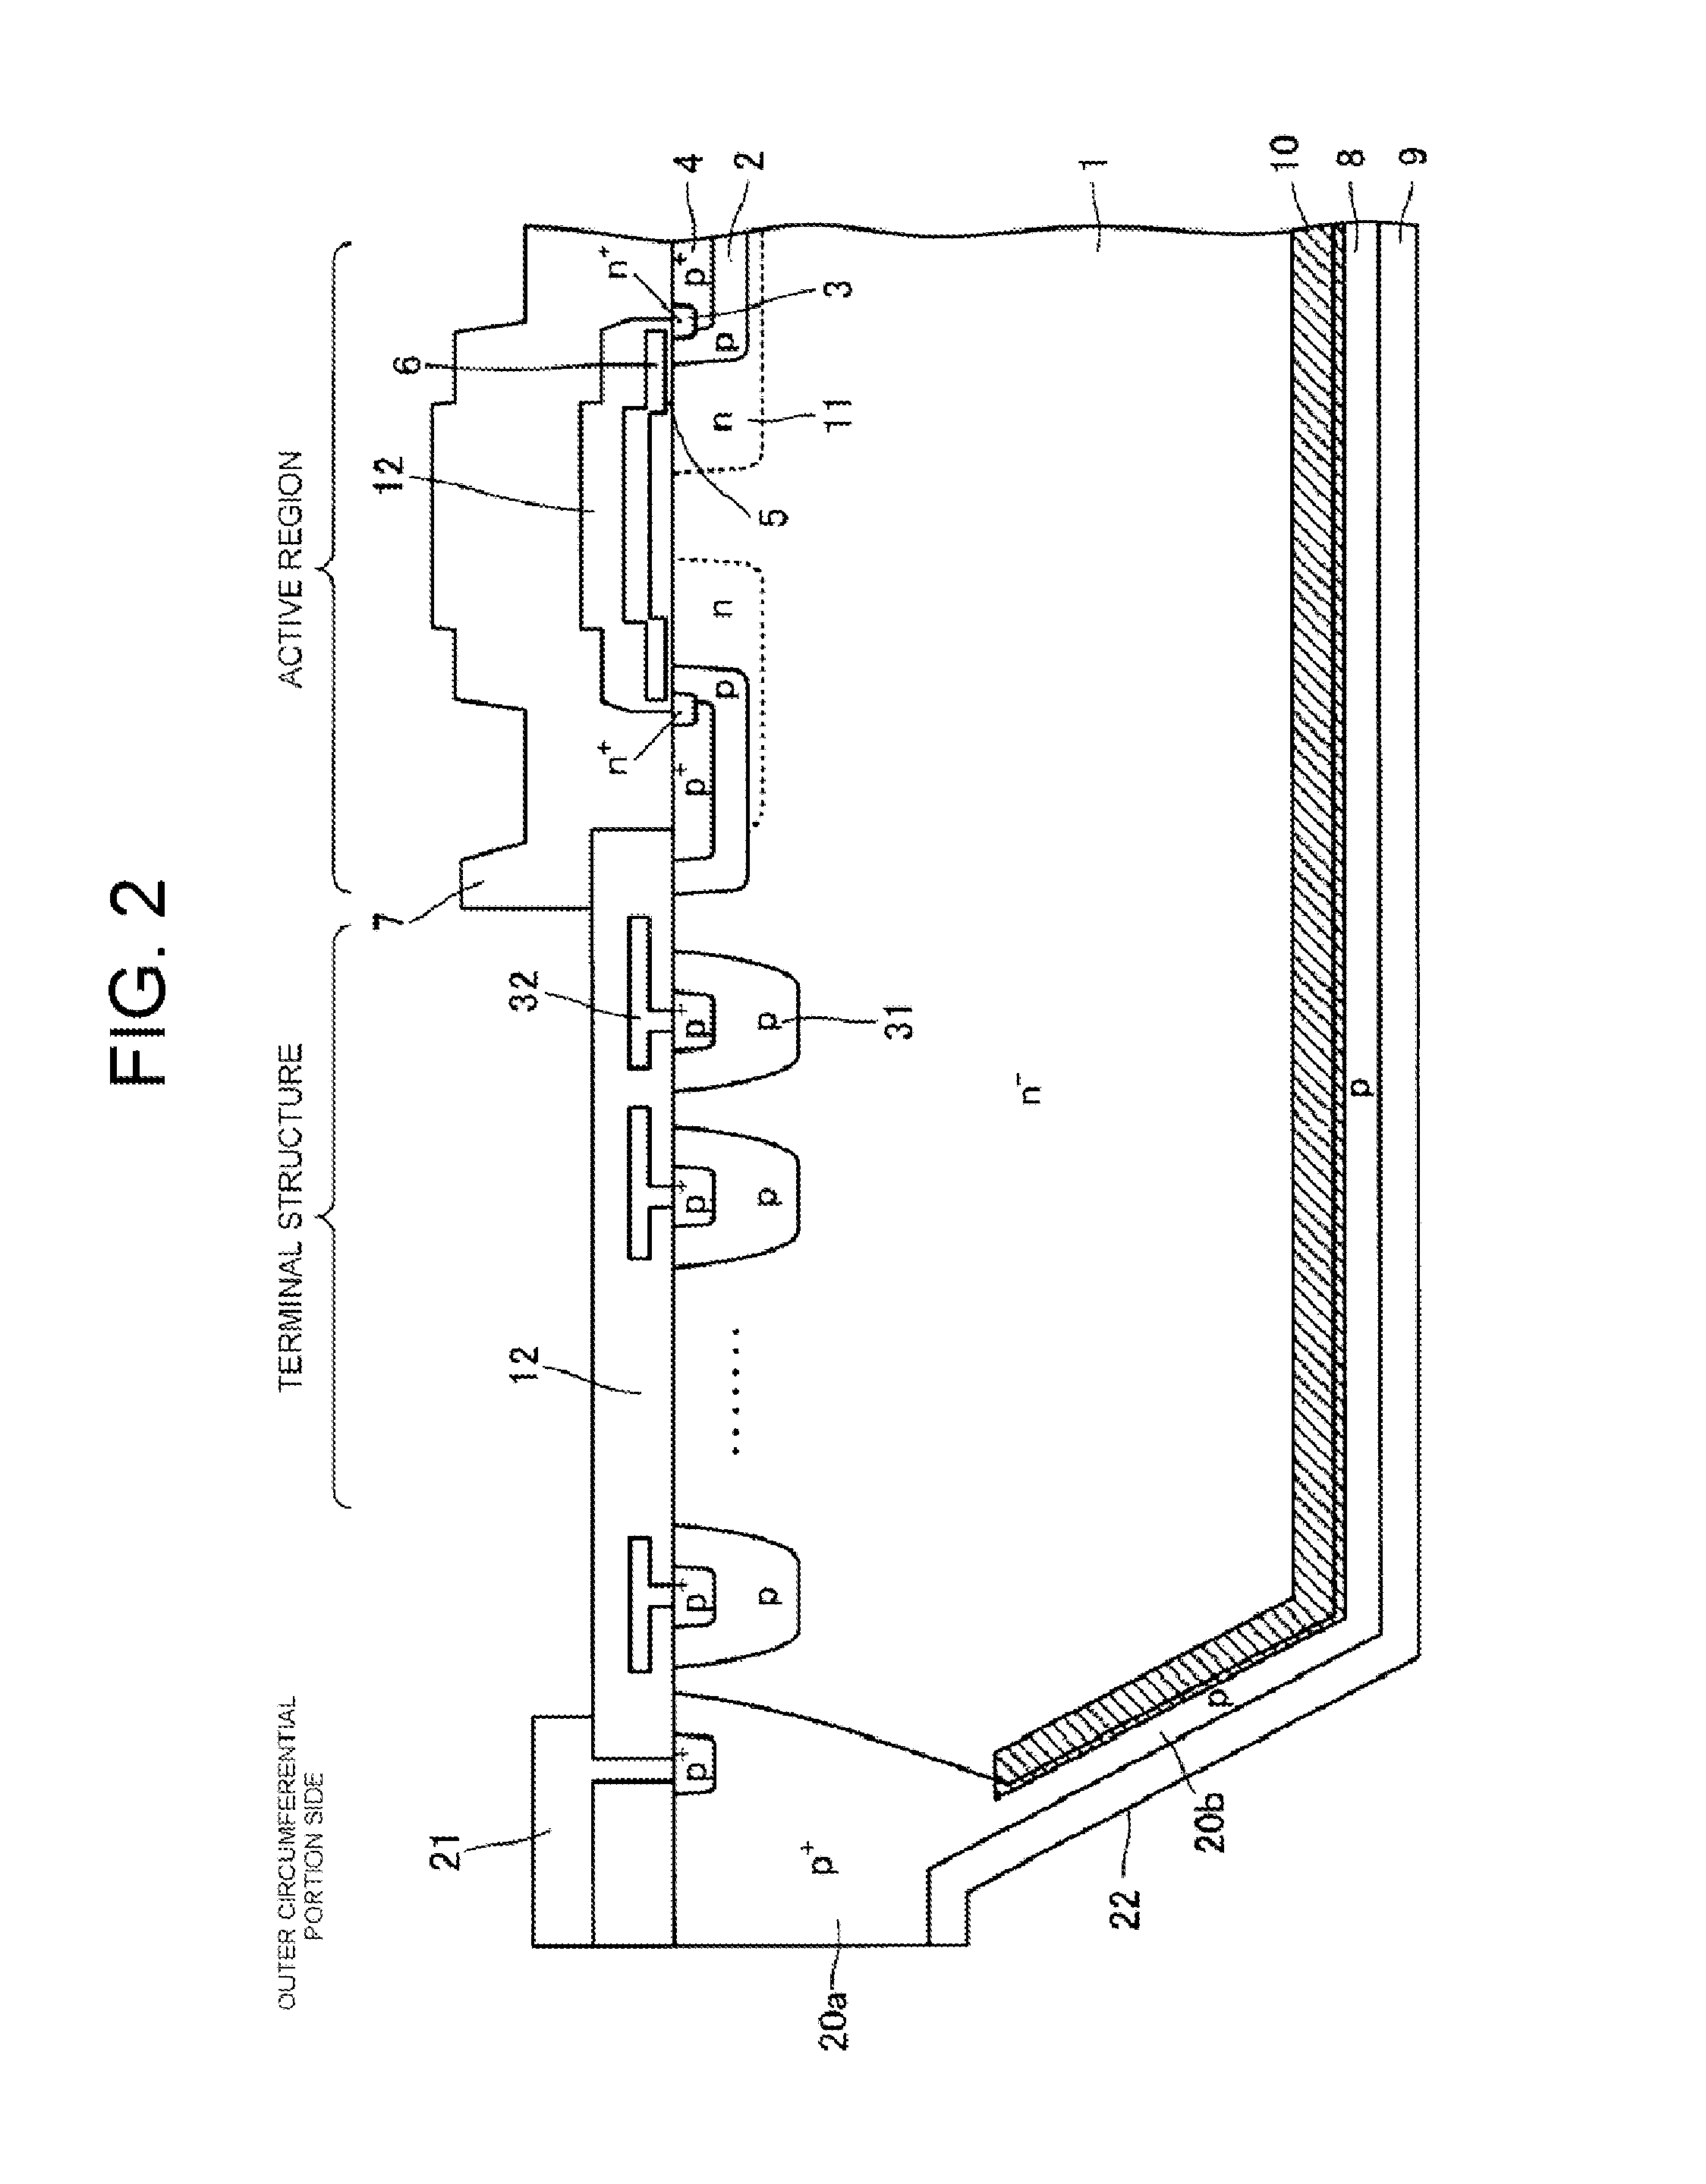 Semiconductor device, method for manufacturing the semiconductor device, and method for controlling the semiconductor device